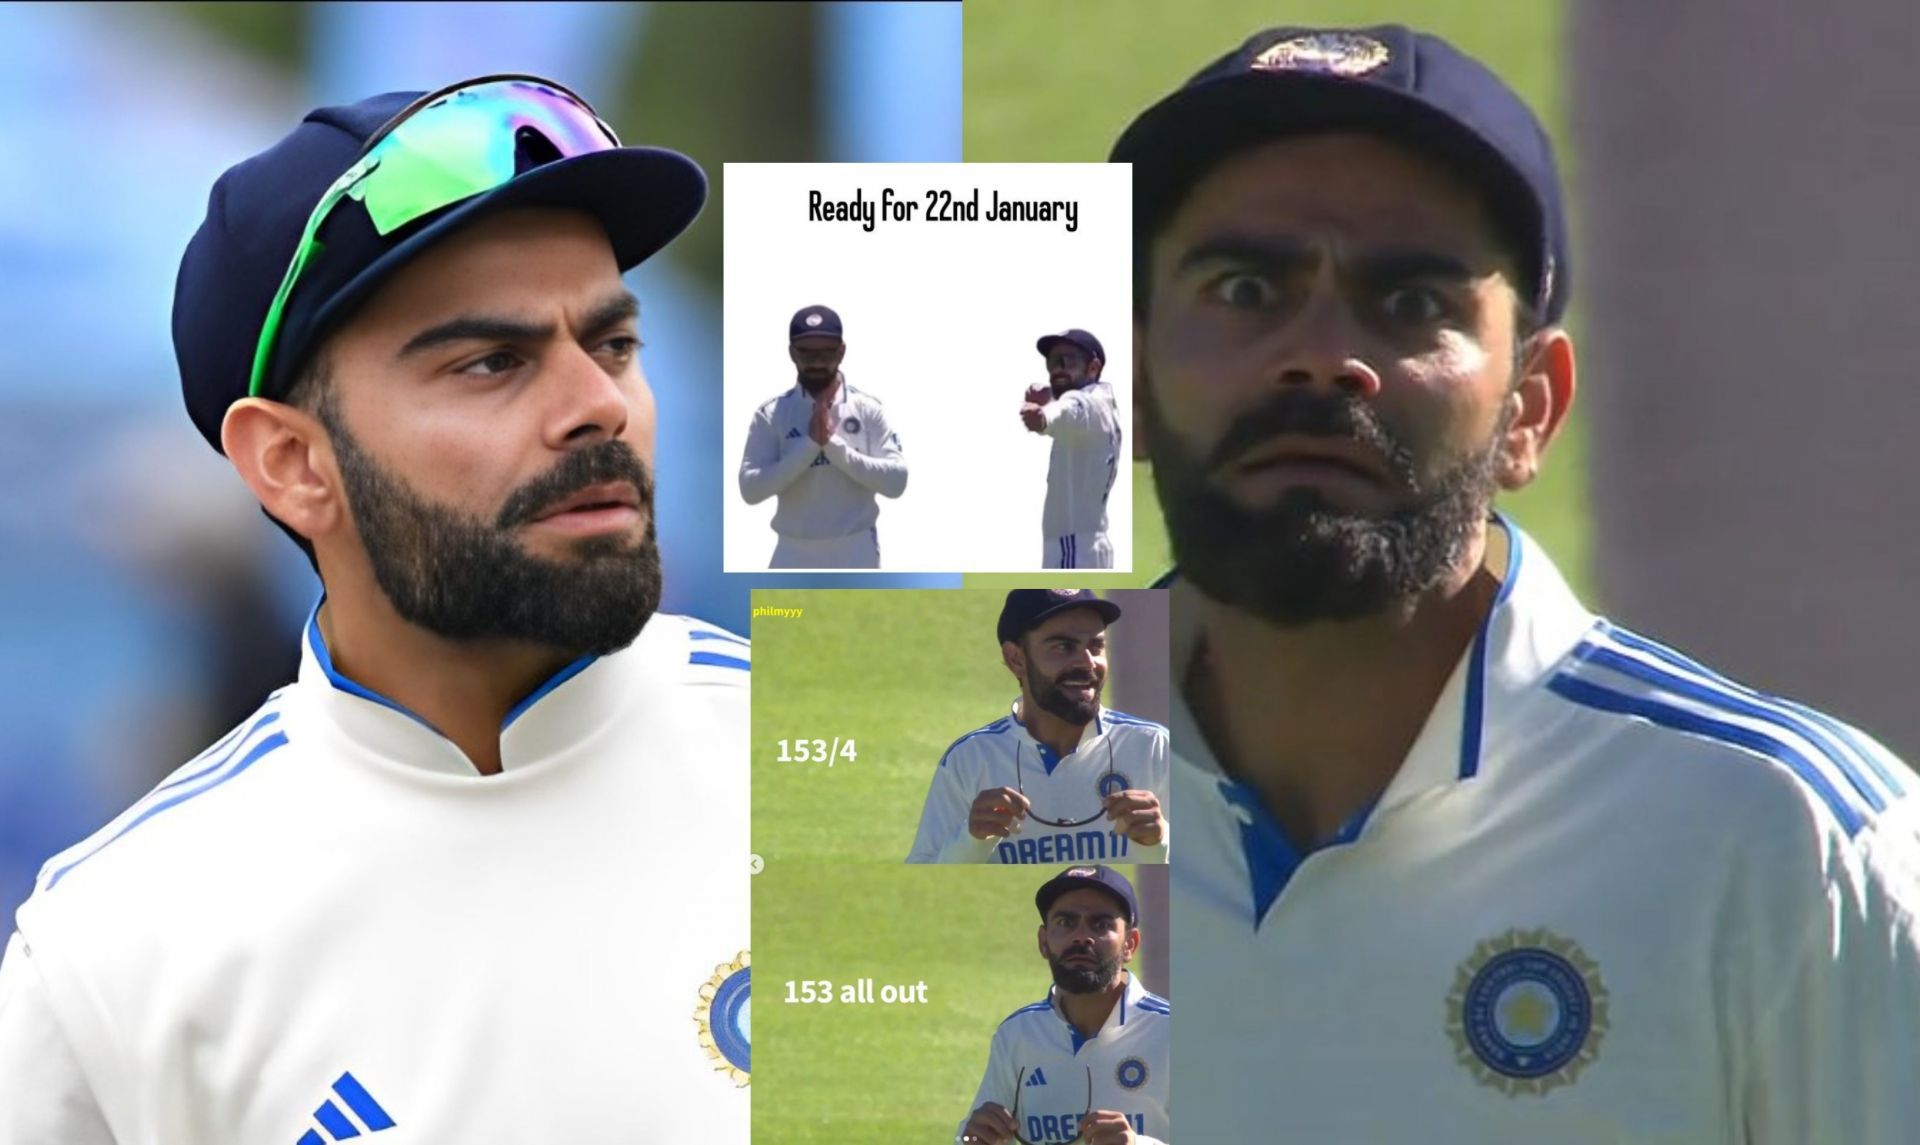 Fans share memes about Virat Kohli from day 1 of 2nd Test.